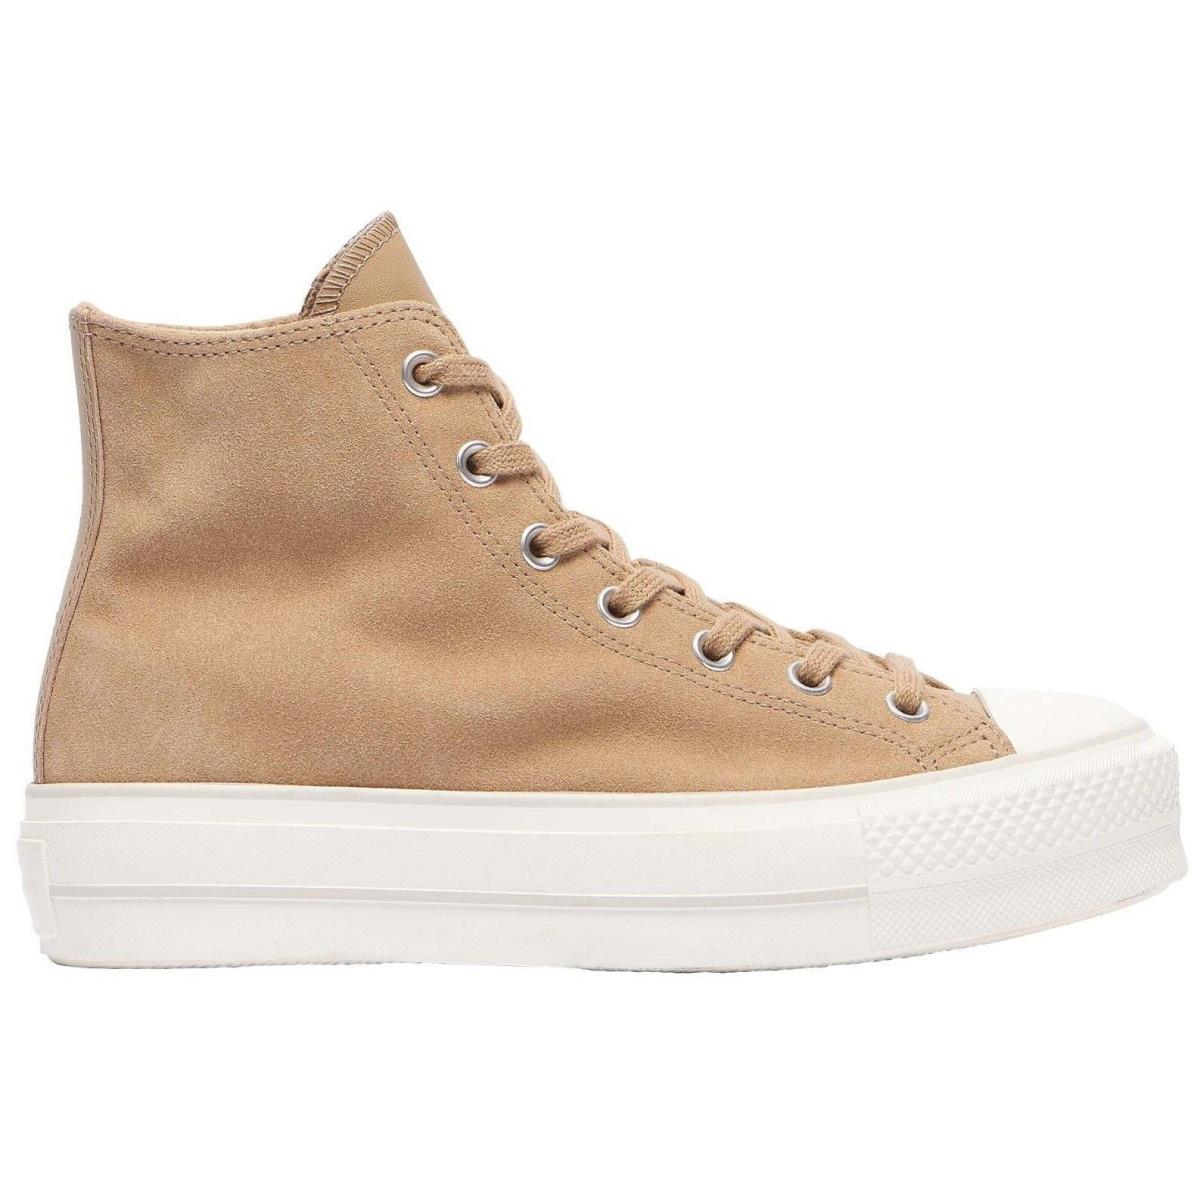 Converse Chuck Taylor All Star Lift Suede Women`s Shoes Khaki US Sizes 6-11